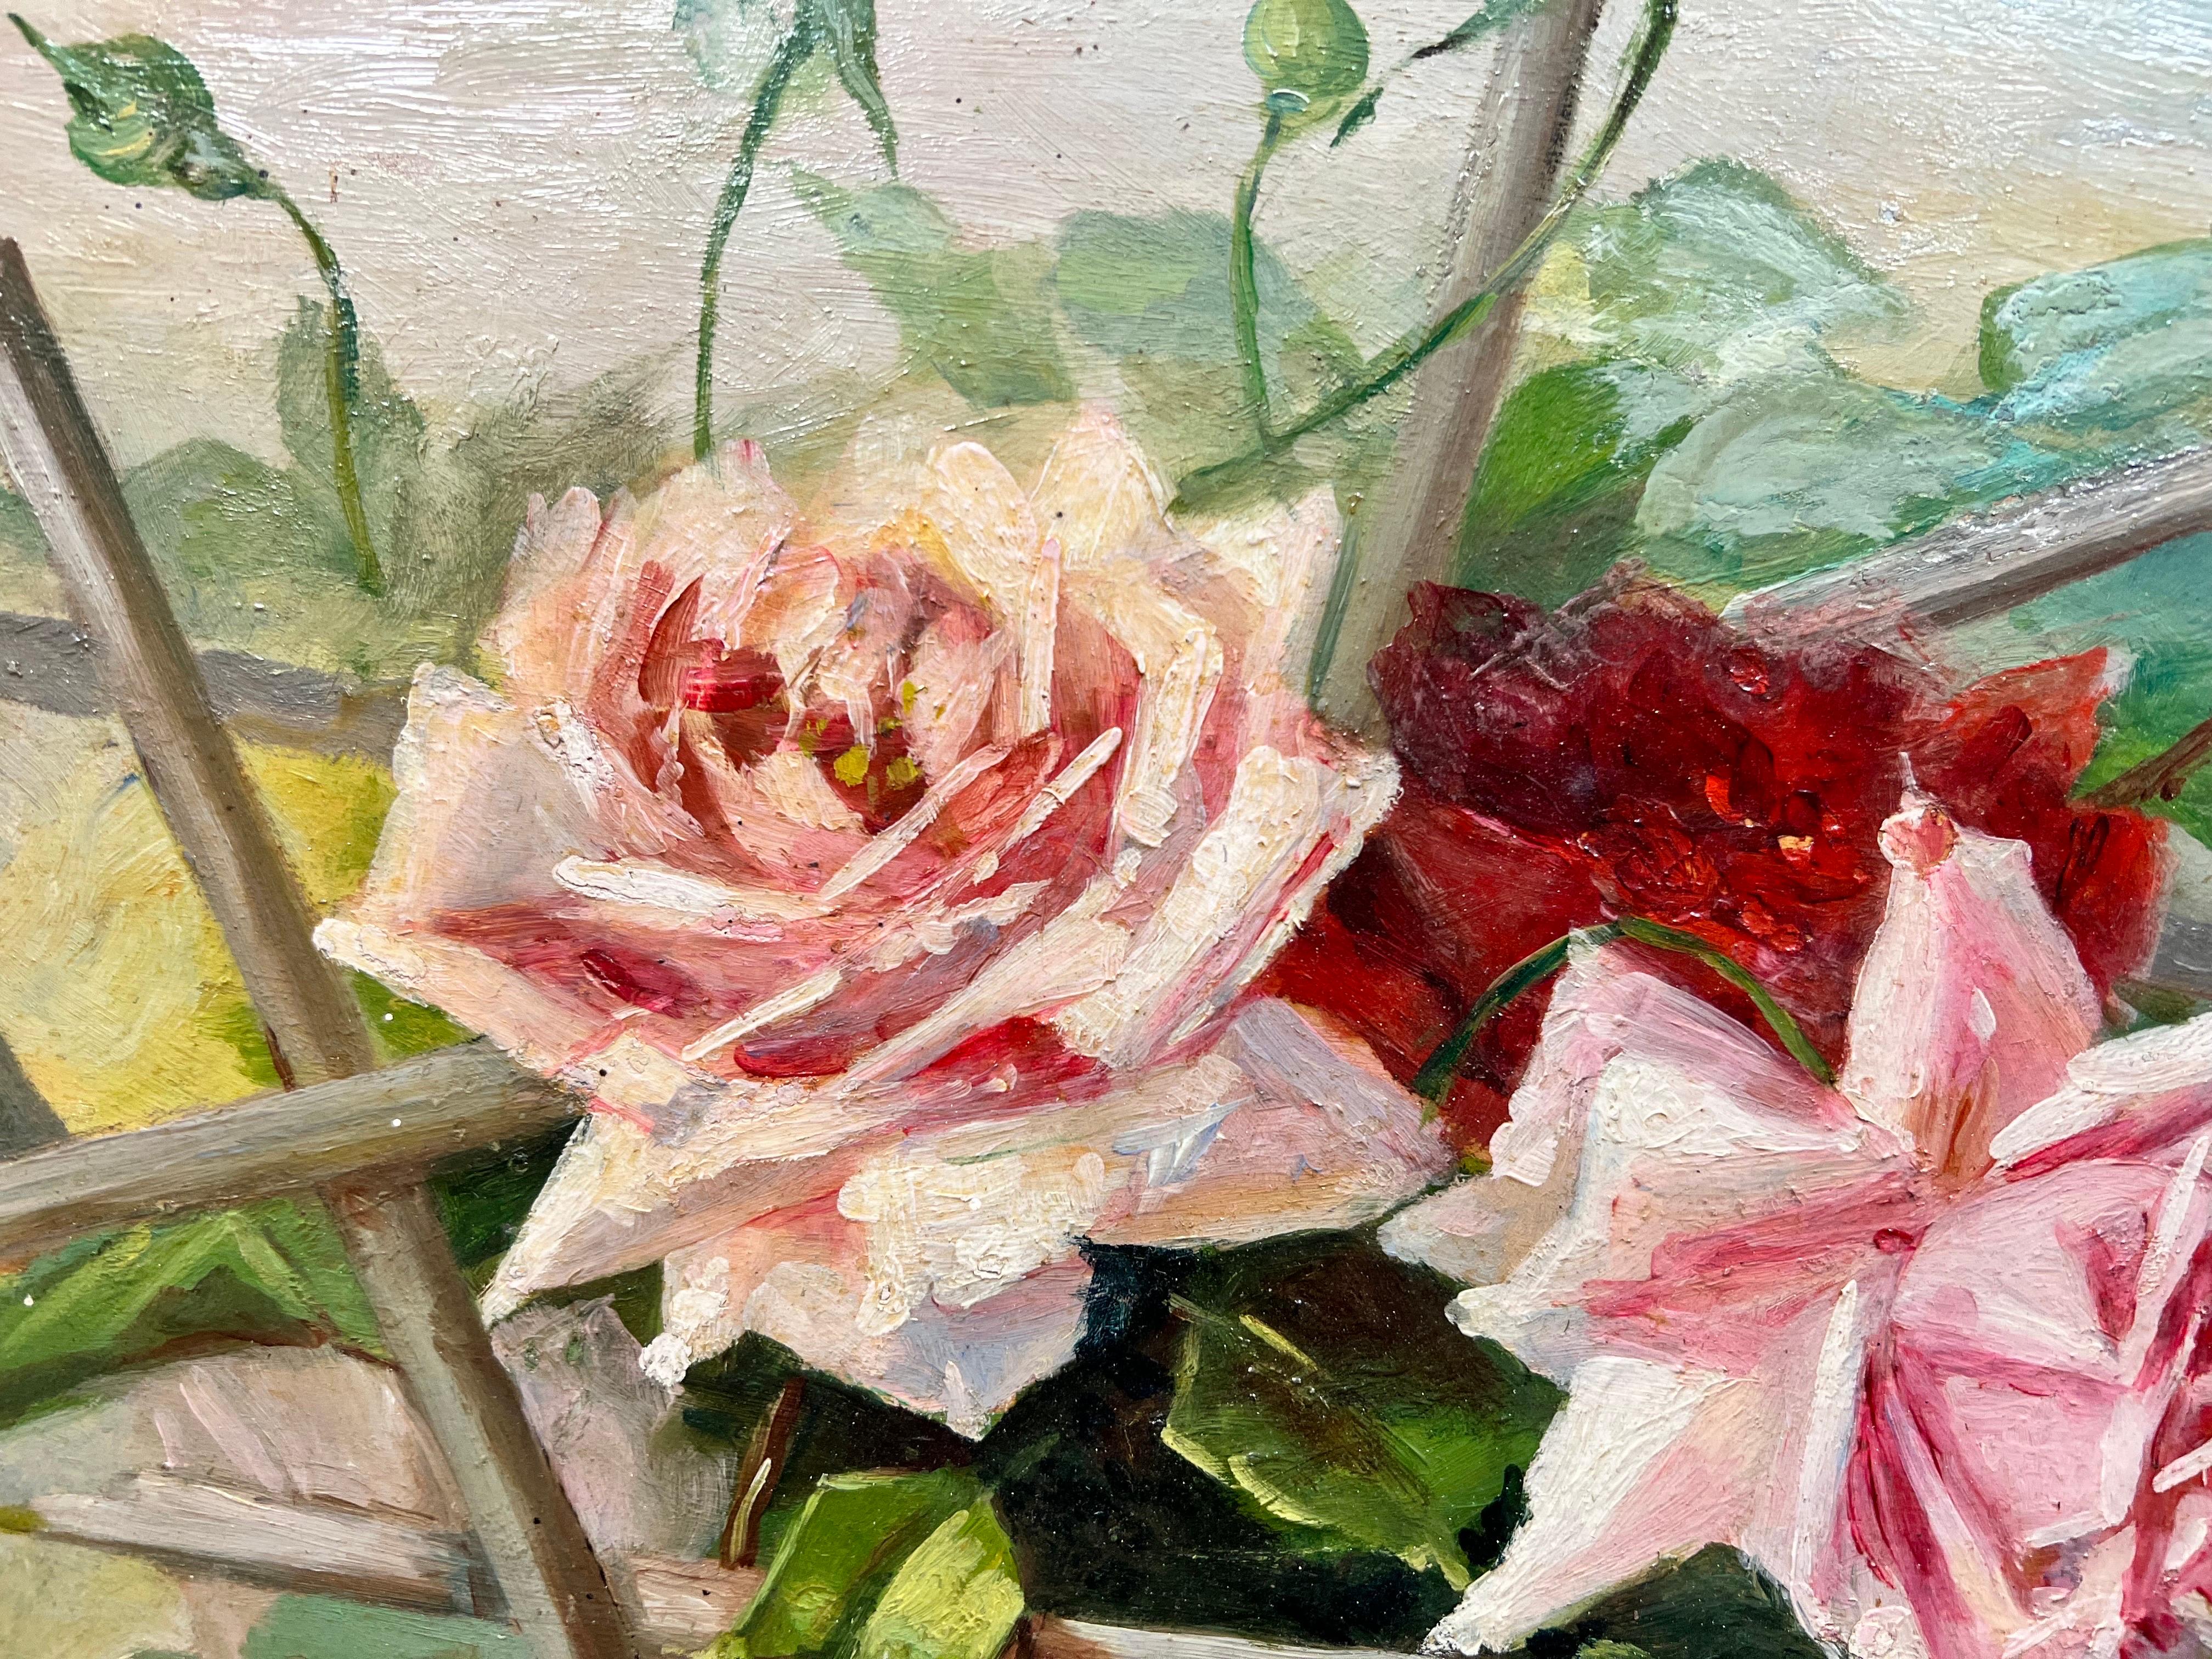 'S.E Baladon', French circa 1950
Roses
oil on board, framed 
framed: 13 x 18 inches
board: 10 x 15 inches
private collection, France
condition: The painting is in overall very good and sound condition.
 